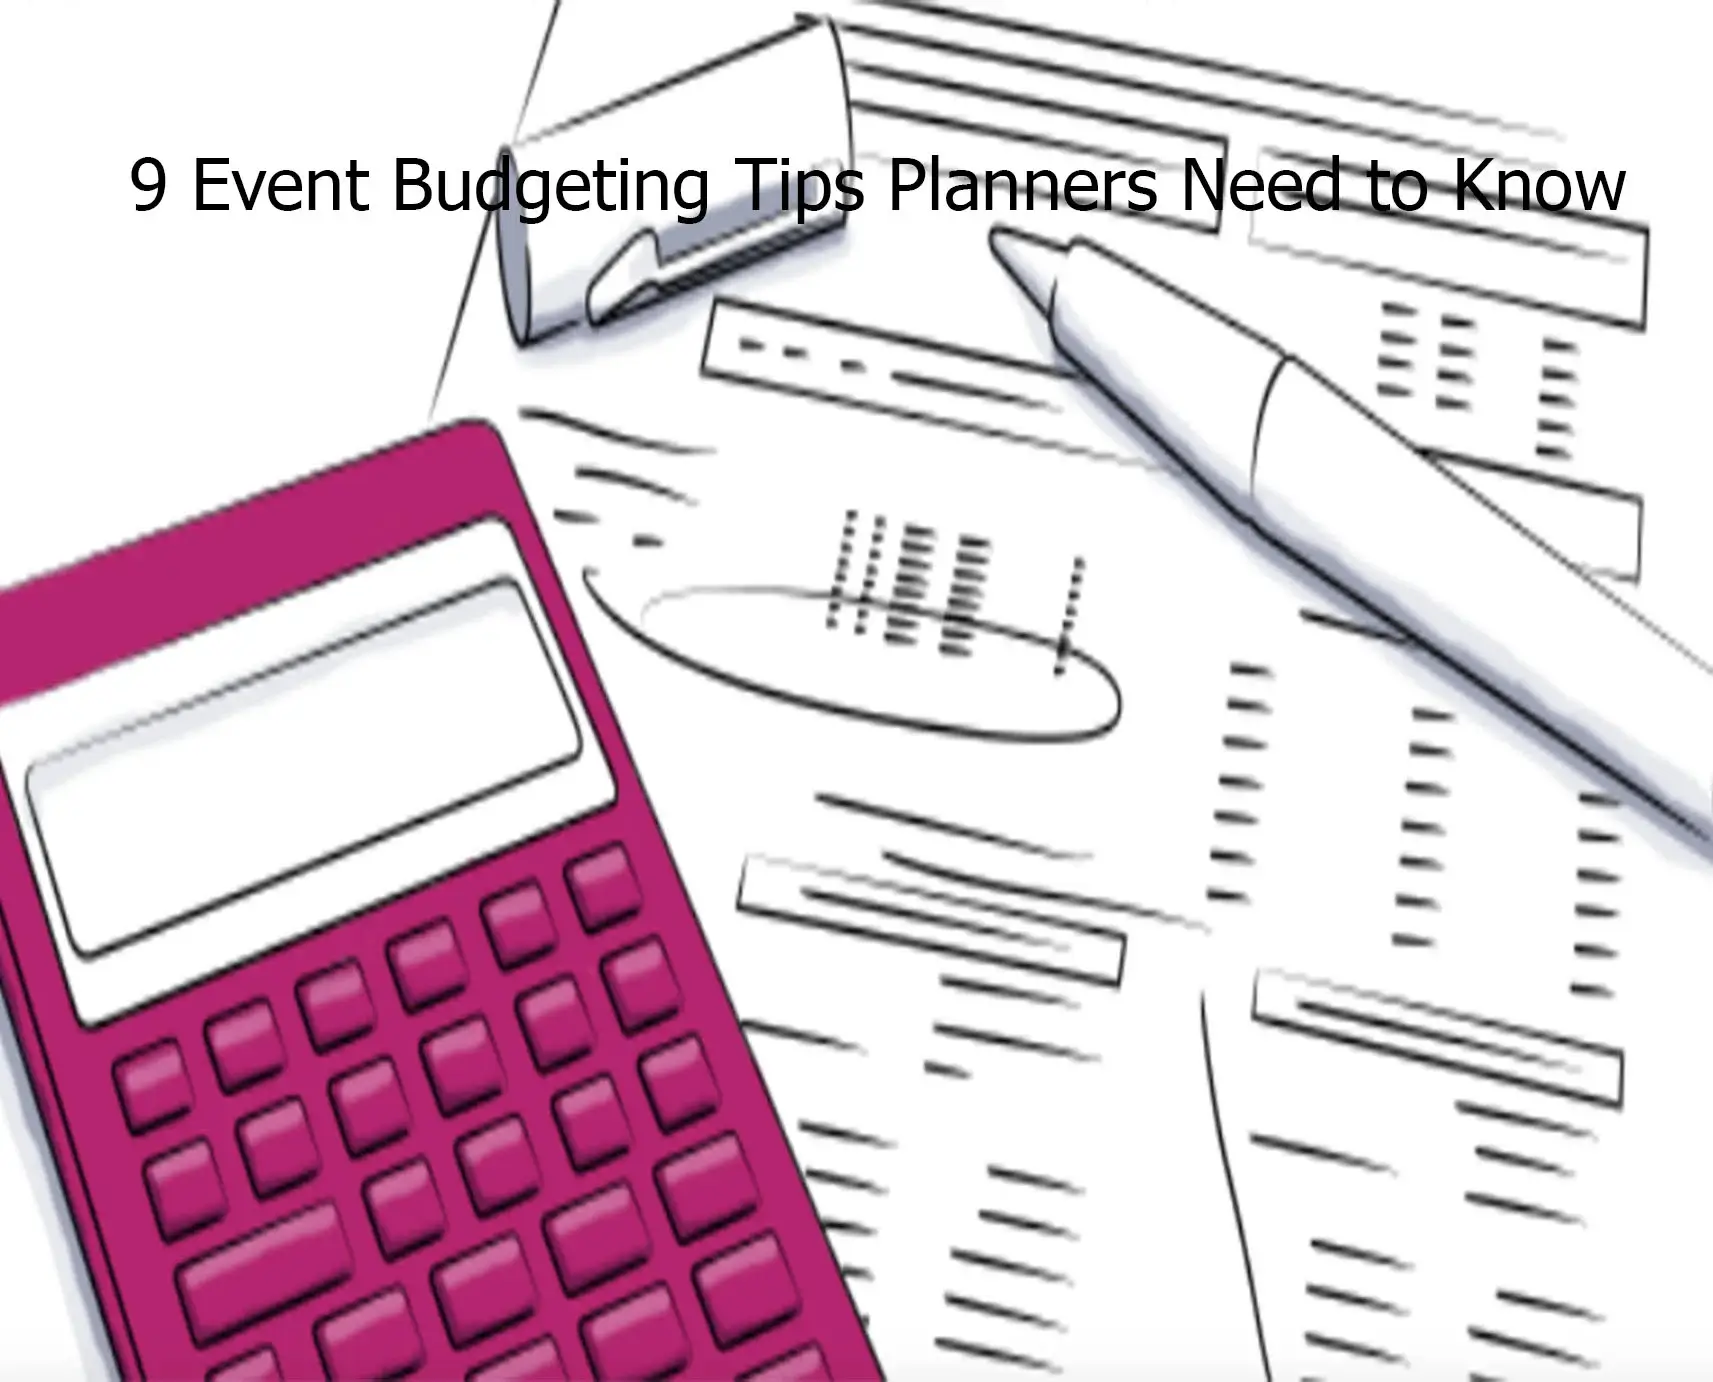 9 Event Budgeting Tips Planners Need to Know